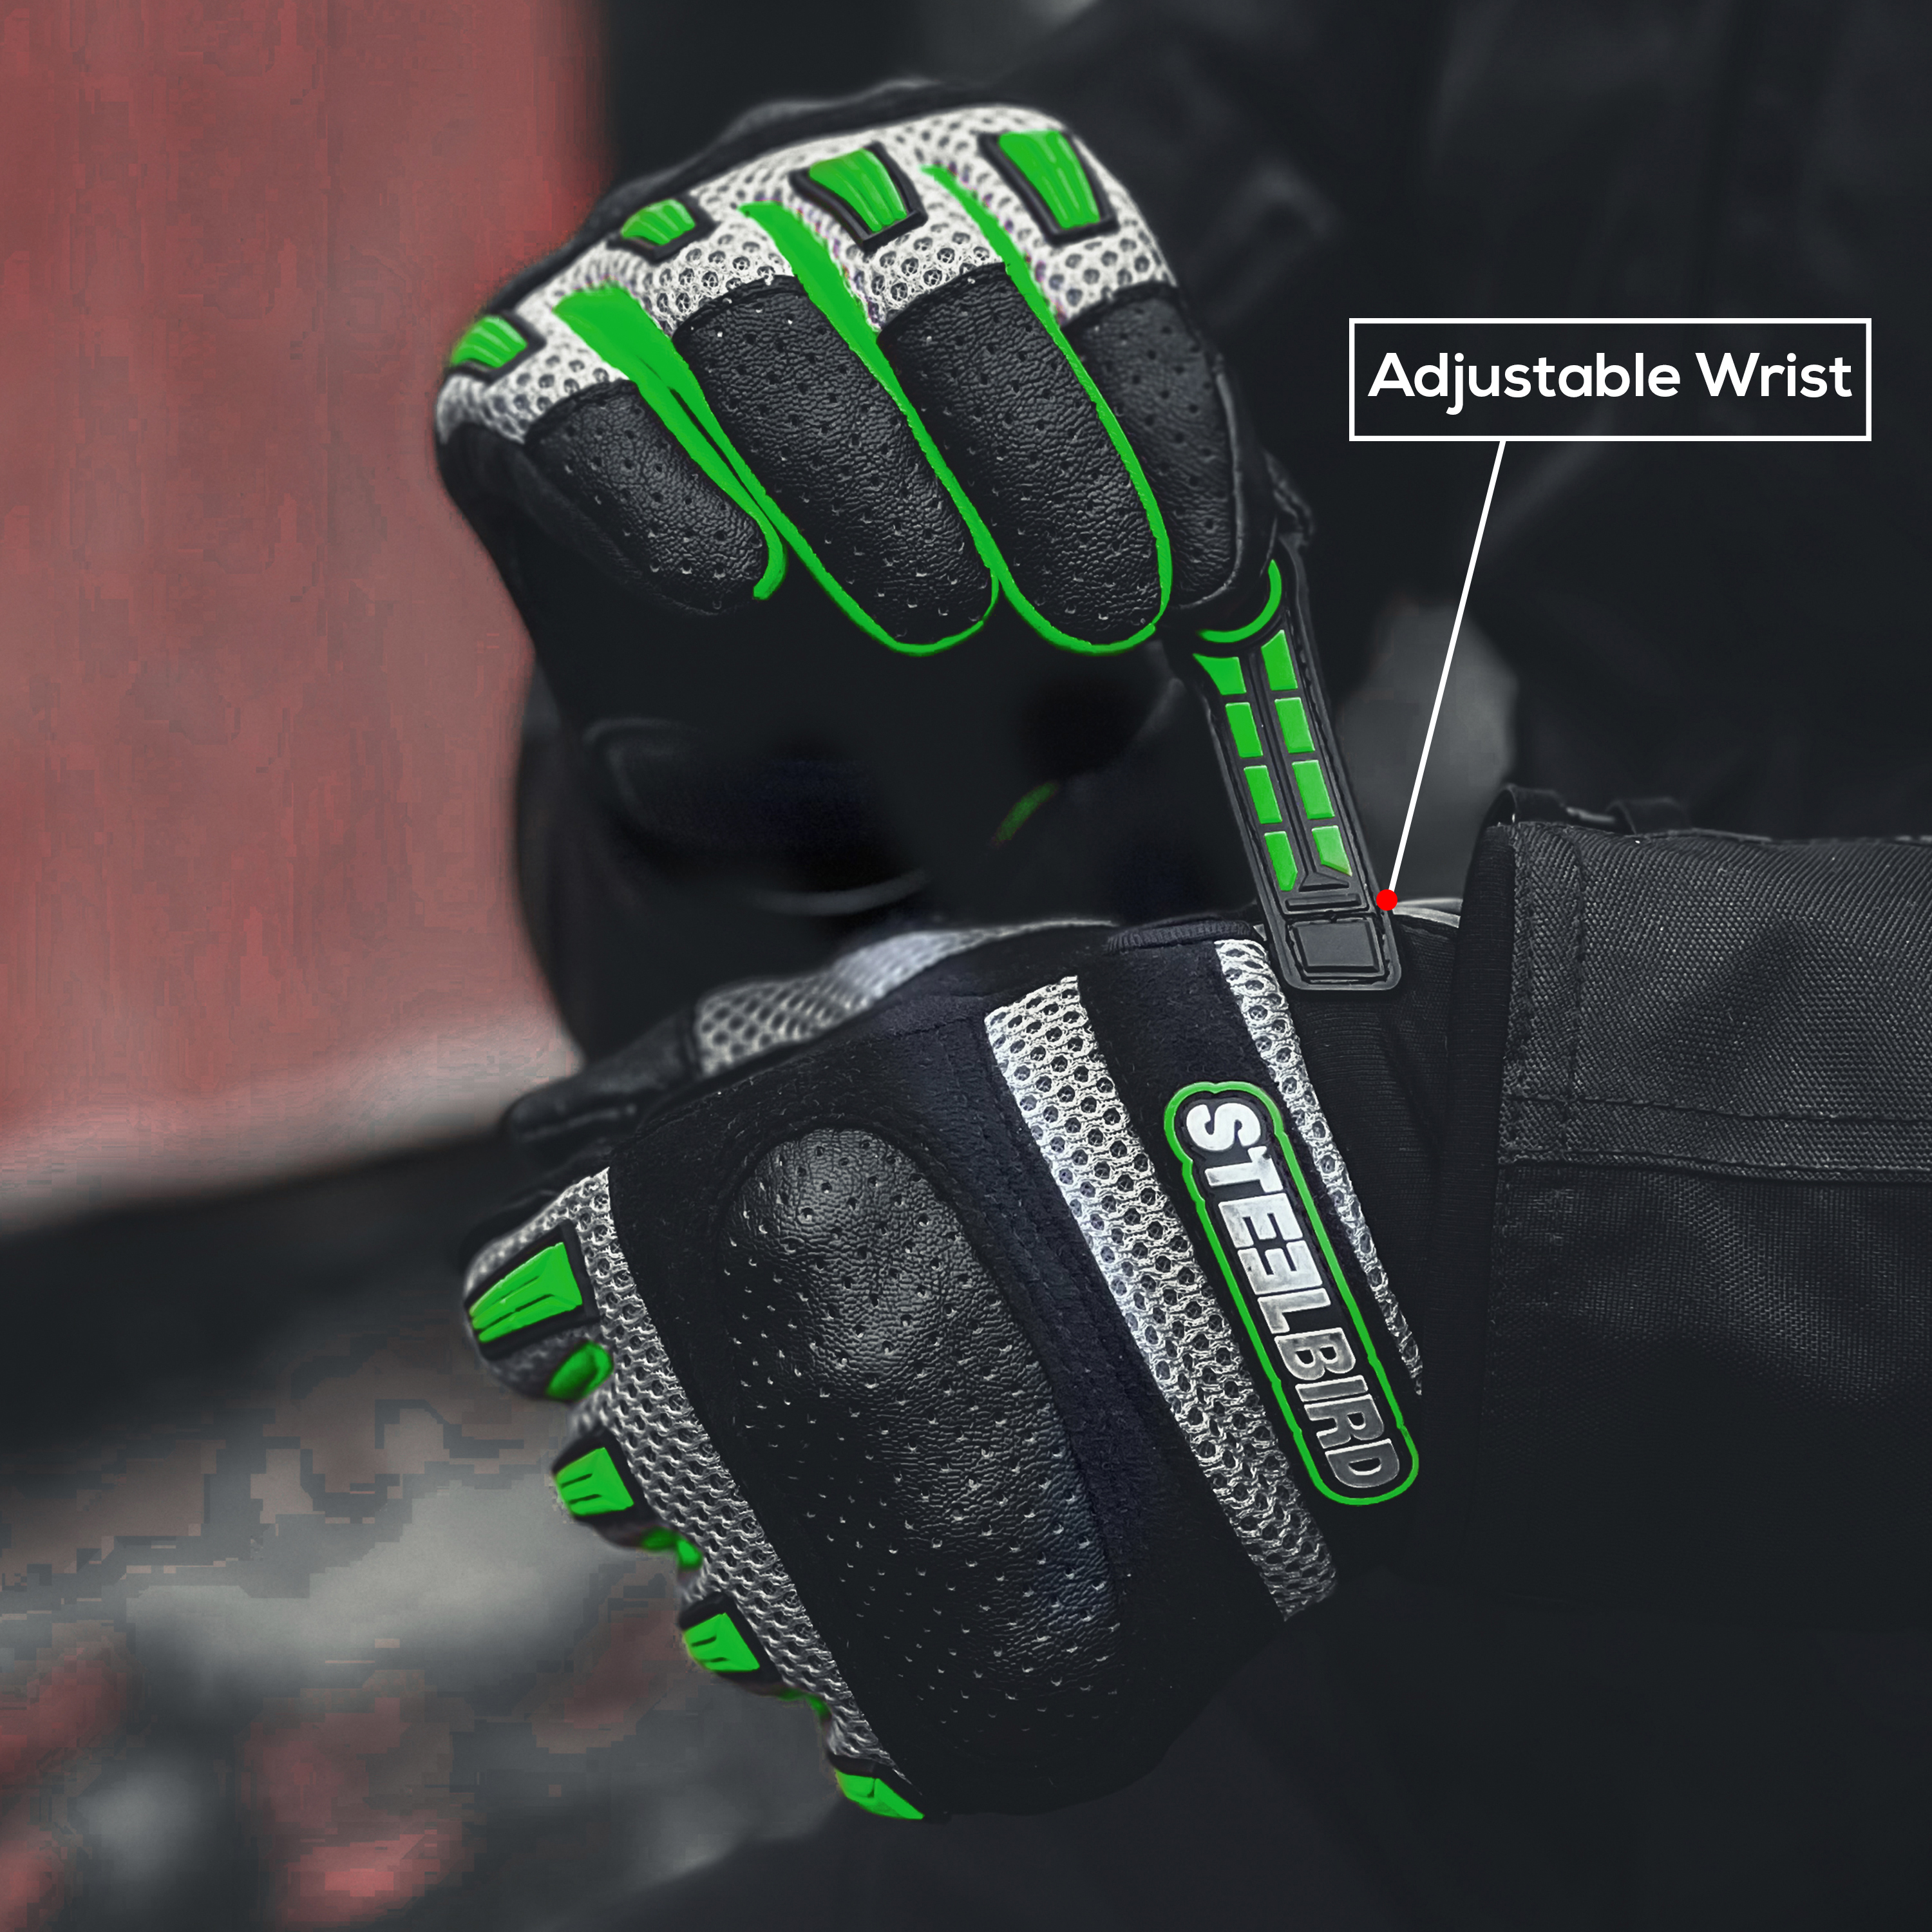 Steelbird Adventure A-1 Full Finger Riding Gloves With Touch Screen Sensitivity At Thumb & Index Finger, Protective Off-Road Motorbike Racing (Green)